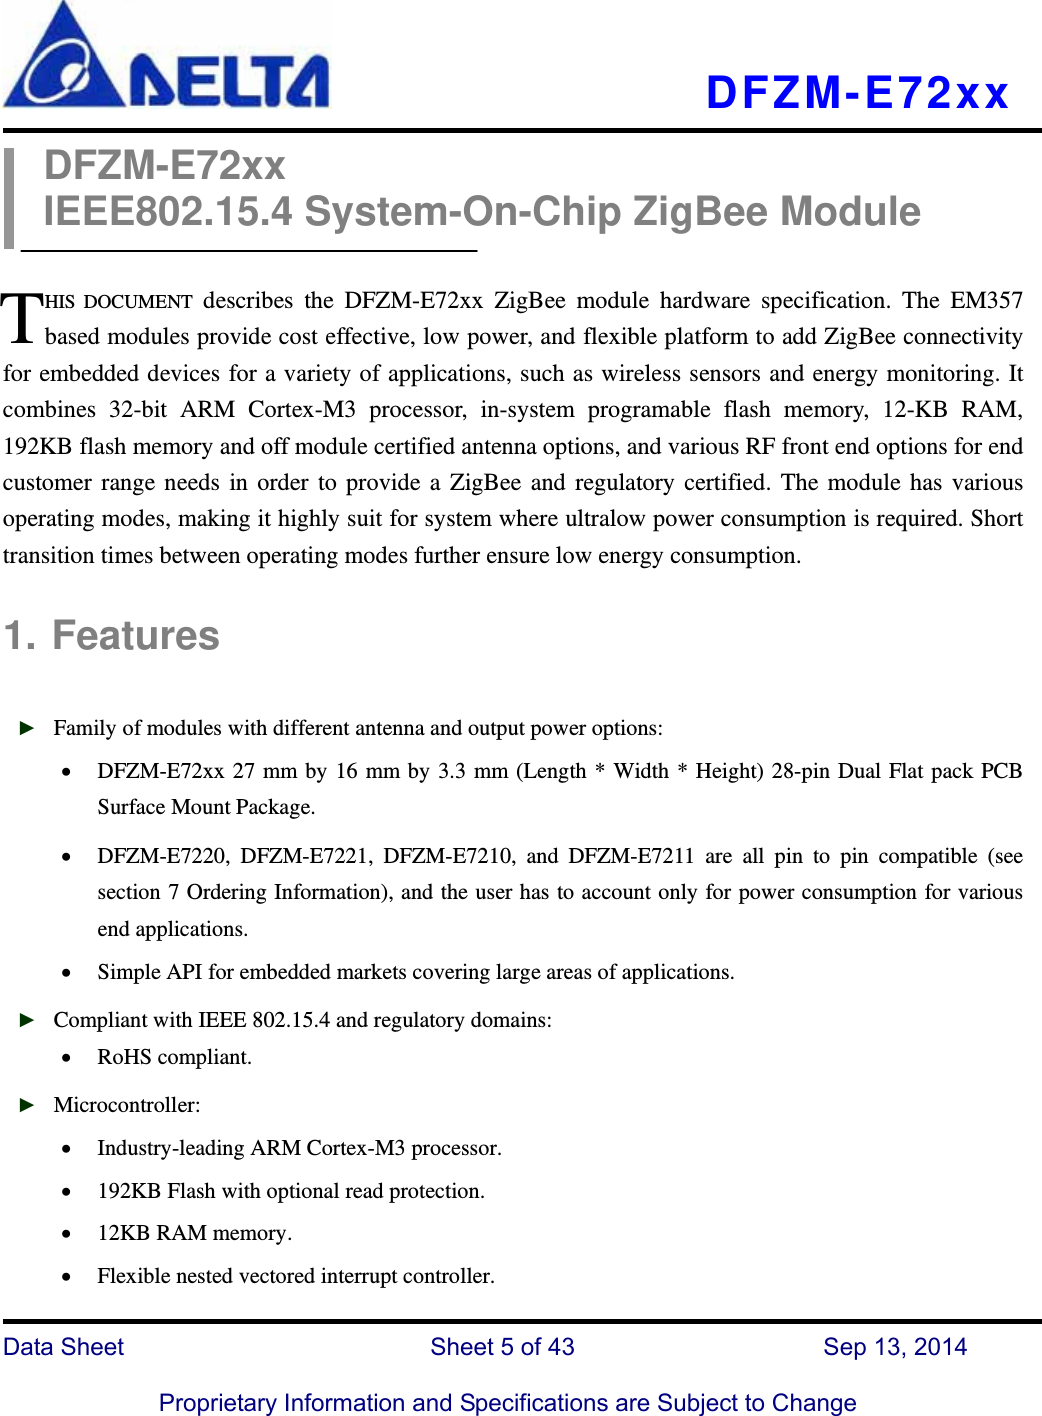   DFZM-E72xx   Data Sheet                 Sheet 5 of 43           Sep 13, 2014  Proprietary Information and Specifications are Subject to Change DFZM-E72xx IEEE802.15.4 System-On-Chip ZigBee Module  HIS DOCUMENT describes the DFZM-E72xx ZigBee module hardware specification. The EM357 based modules provide cost effective, low power, and flexible platform to add ZigBee connectivity for embedded devices for a variety of applications, such as wireless sensors and energy monitoring. It combines 32-bit ARM Cortex-M3 processor, in-system programable flash memory, 12-KB RAM, 192KB flash memory and off module certified antenna options, and various RF front end options for end customer range needs in order to provide a ZigBee and regulatory certified. The module has various operating modes, making it highly suit for system where ultralow power consumption is required. Short transition times between operating modes further ensure low energy consumption.  1. Features  ► Family of modules with different antenna and output power options:  DFZM-E72xx 27 mm by 16 mm by 3.3 mm (Length * Width * Height) 28-pin Dual Flat pack PCB Surface Mount Package.  DFZM-E7220, DFZM-E7221, DFZM-E7210, and DFZM-E7211 are all pin to pin compatible (see section 7 Ordering Information), and the user has to account only for power consumption for various end applications.  Simple API for embedded markets covering large areas of applications. ► Compliant with IEEE 802.15.4 and regulatory domains:  RoHS compliant.   ► Microcontroller:  Industry-leading ARM Cortex-M3 processor.  192KB Flash with optional read protection.    12KB RAM memory.  Flexible nested vectored interrupt controller. T